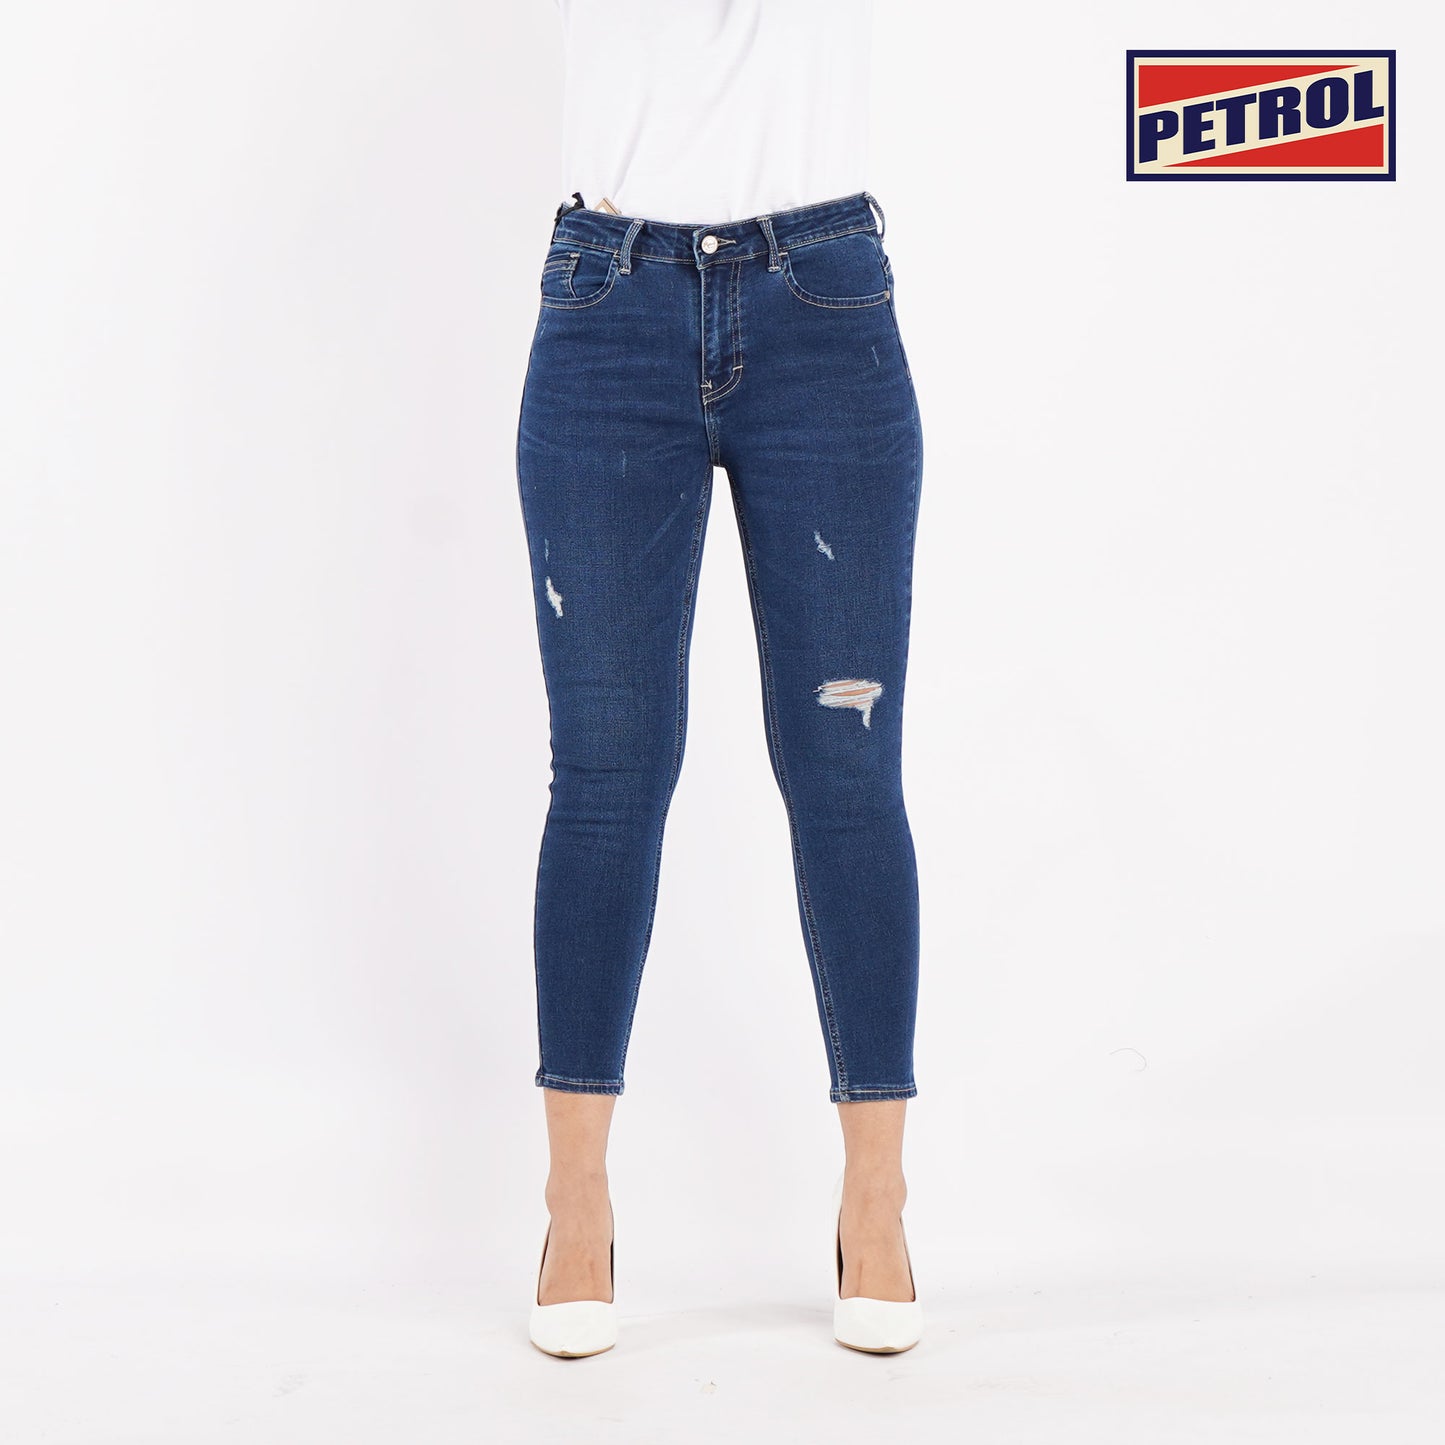 Petrol Ladies Basic Denim Stretchable Cropped jeans for Women Mid Waist Trendy Fashion High Quality Apparel Comfortable Casual Ankle Cut Pants for Women Mid Rise 125607-U (Medium Shade)